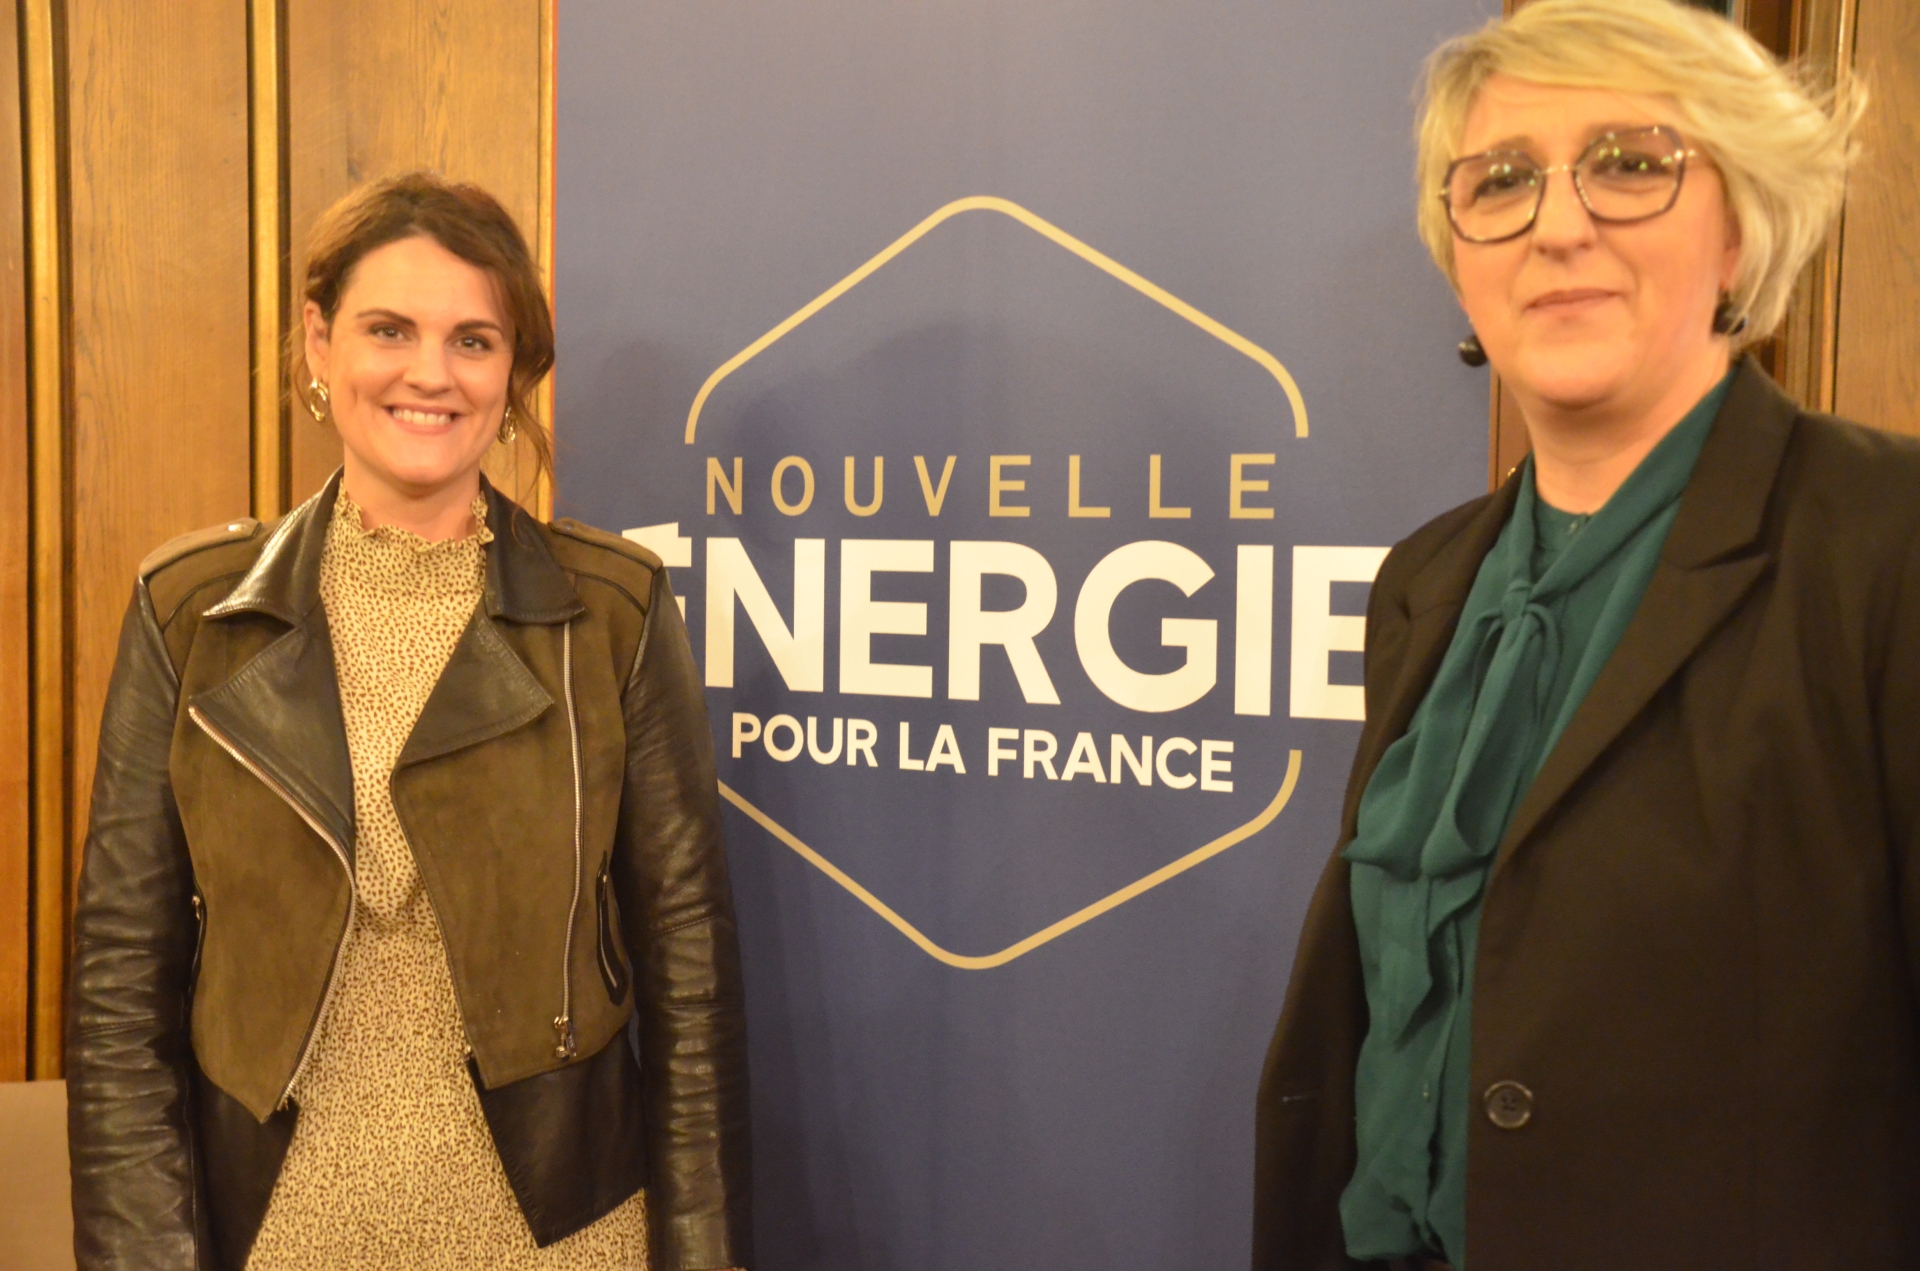 The New Energy for France party is structured on the Gold Coast and is with Charlotte Fougere.